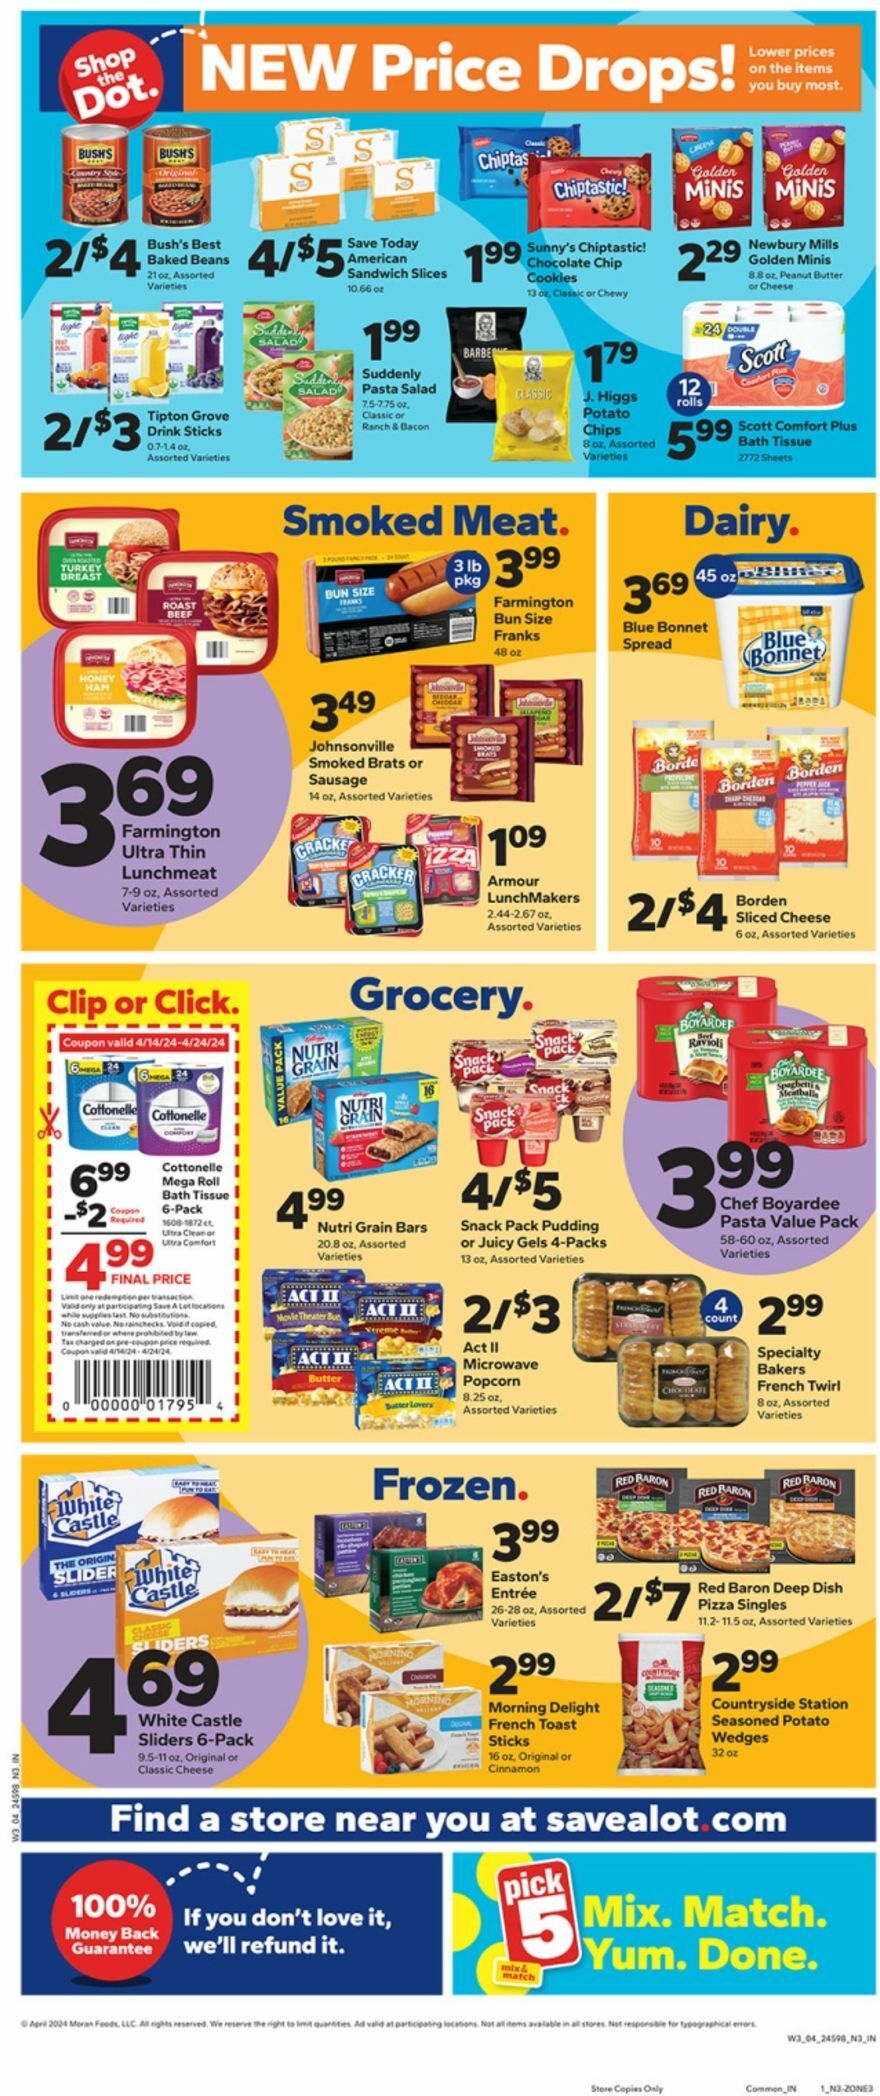 Save A Lot Weekly Ad from April 17